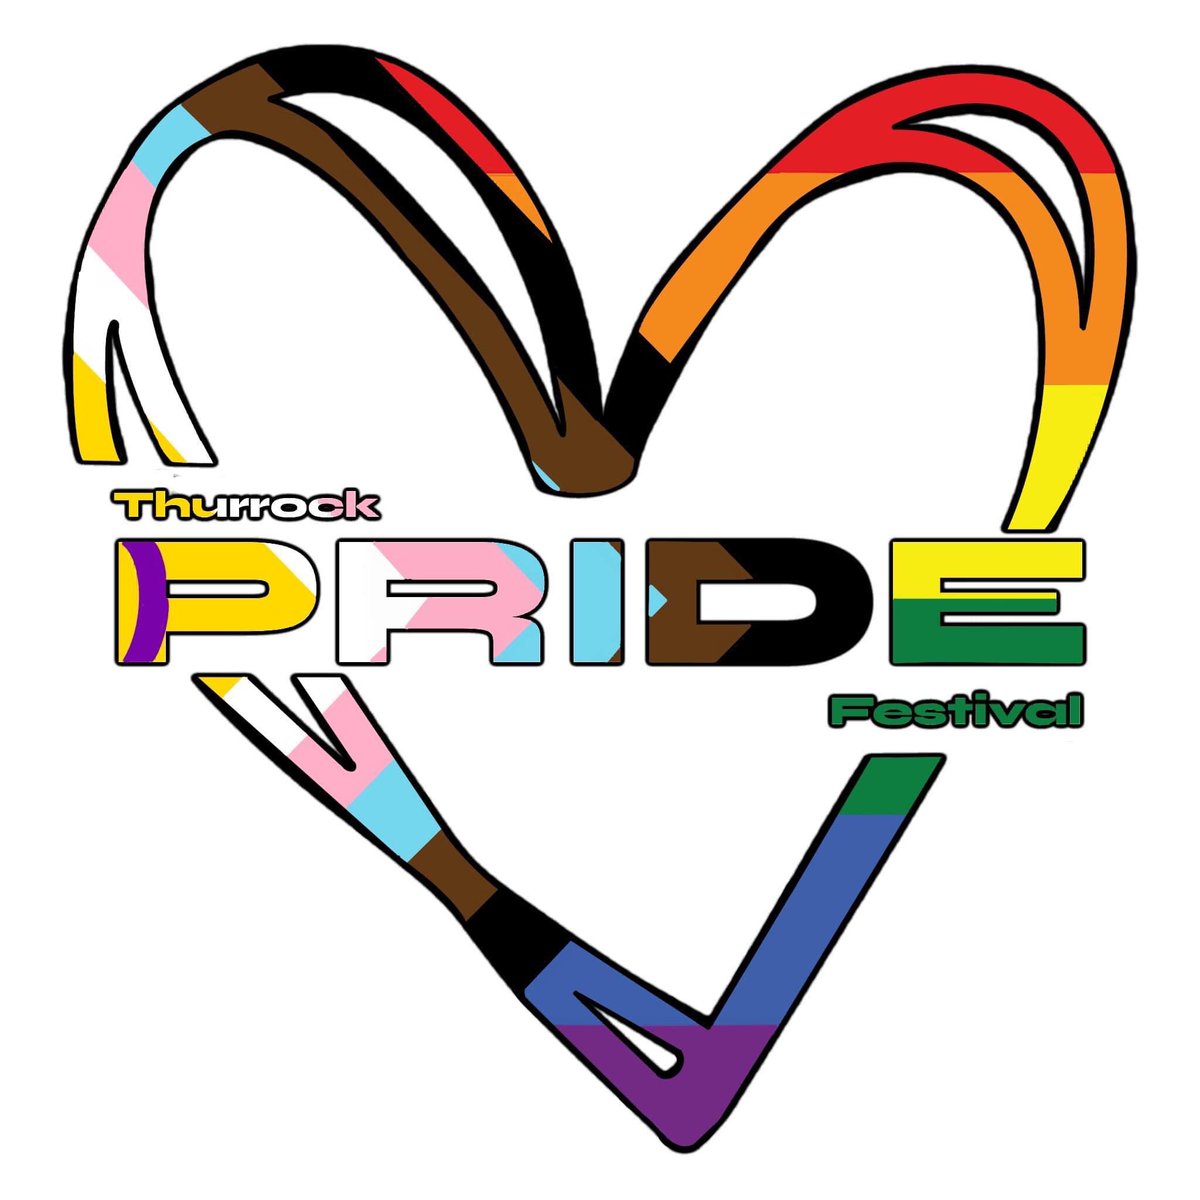 Hey Folks, I’m working on the 1st ever Thurrock Pride Festival and we’re looking for people to get involved in lots of different ways  

Volunteers
docs.google.com/forms/d/e/1FAI…

Performers
docs.google.com/forms/d/e/1FAI…

Caterers
docs.google.com/forms/d/e/1FAI…

Stall holders
docs.google.com/forms/d/e/1FAI…